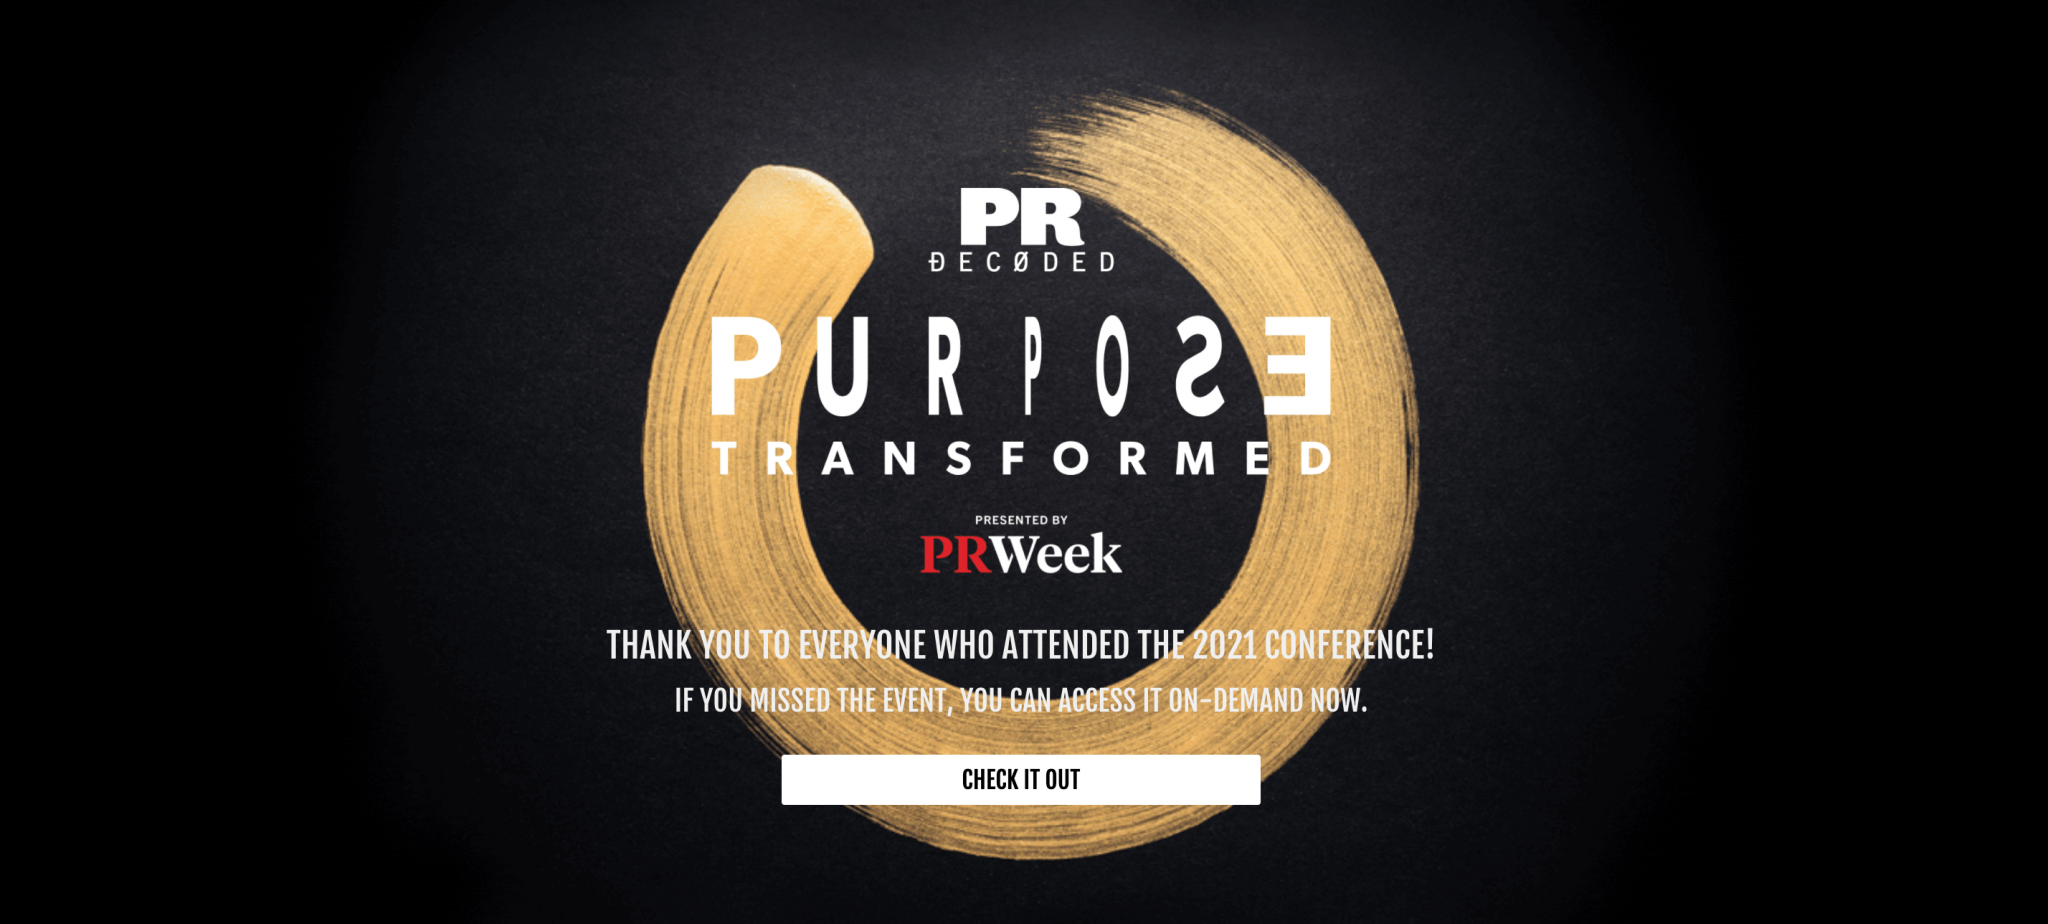 Best PR Conferences that You Should (Try to) Attend in 2022